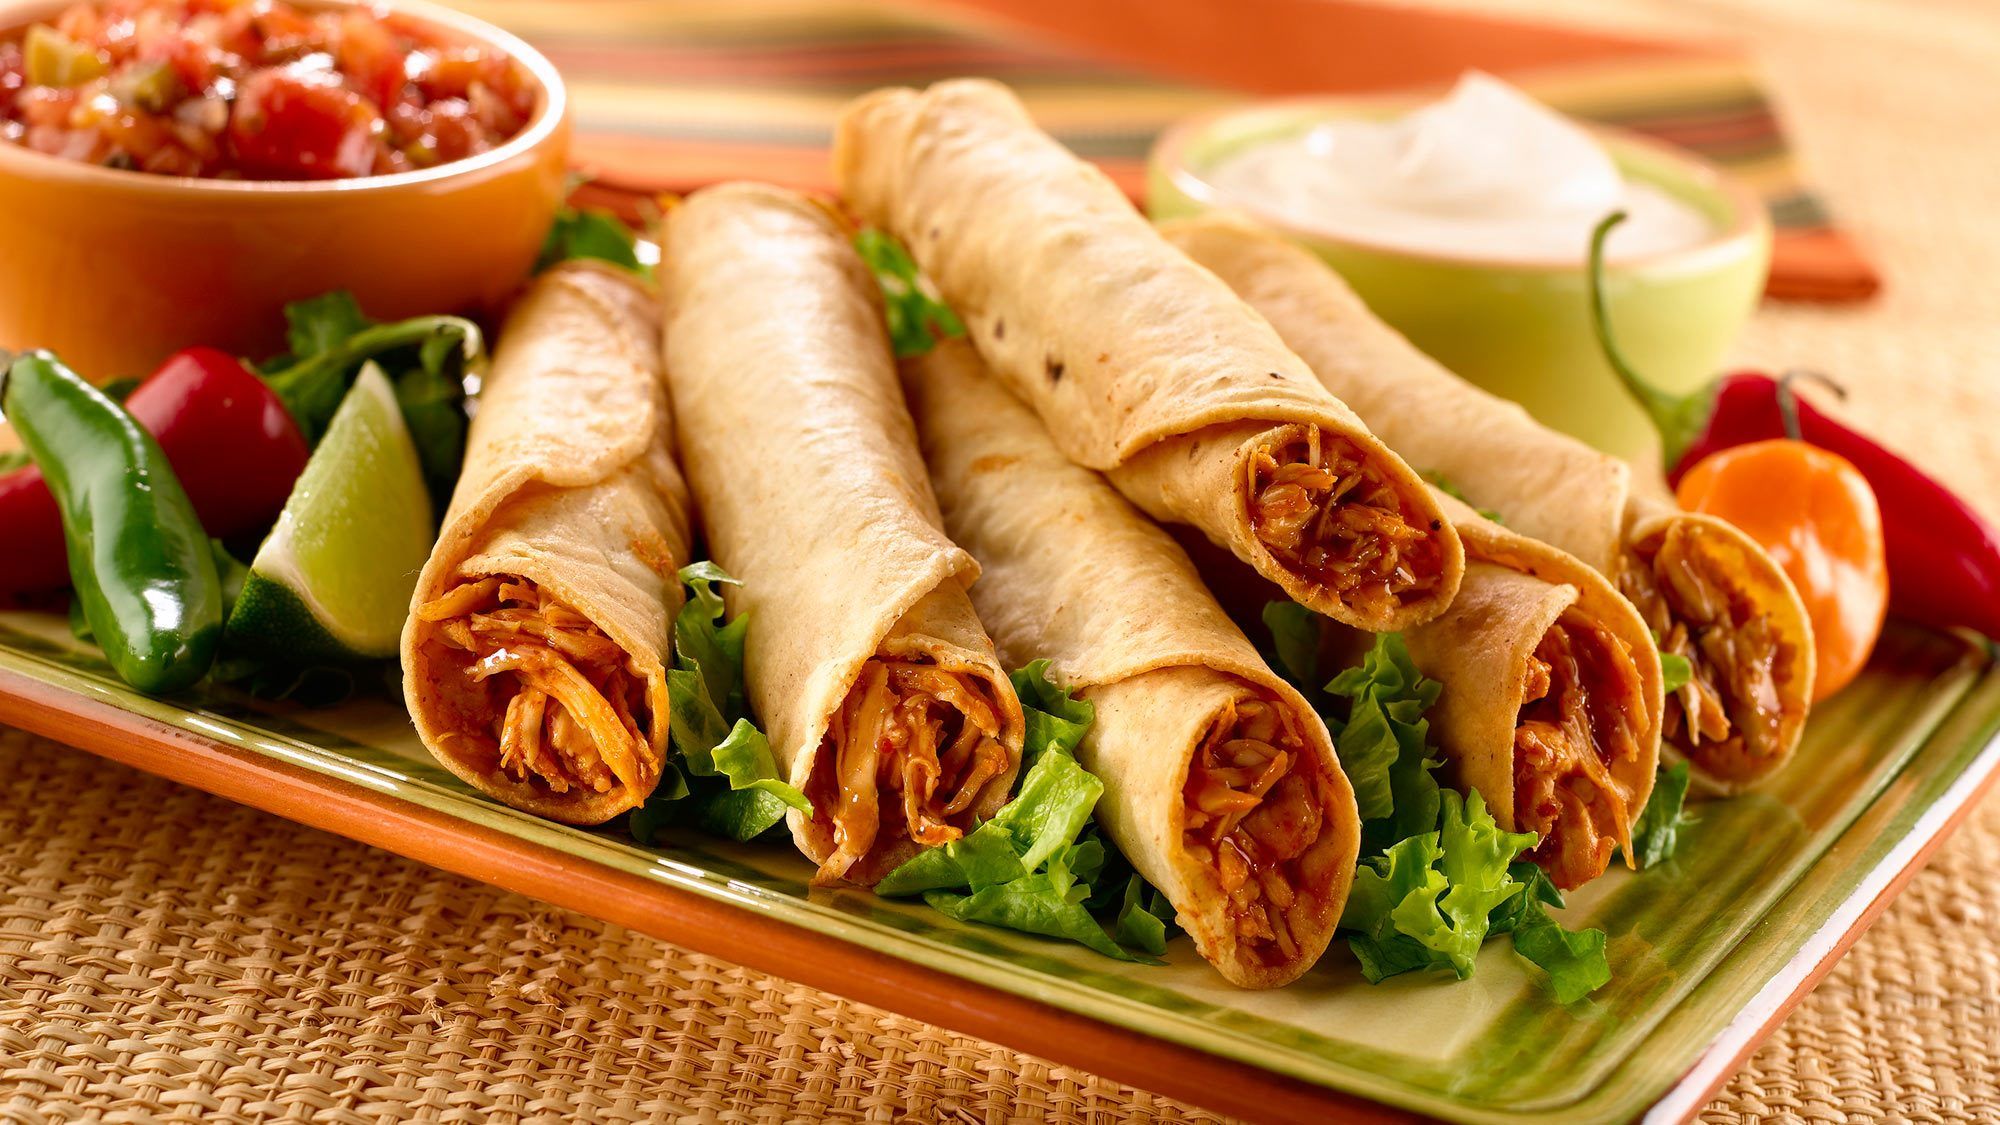 Are flautas healthy? - Foodly